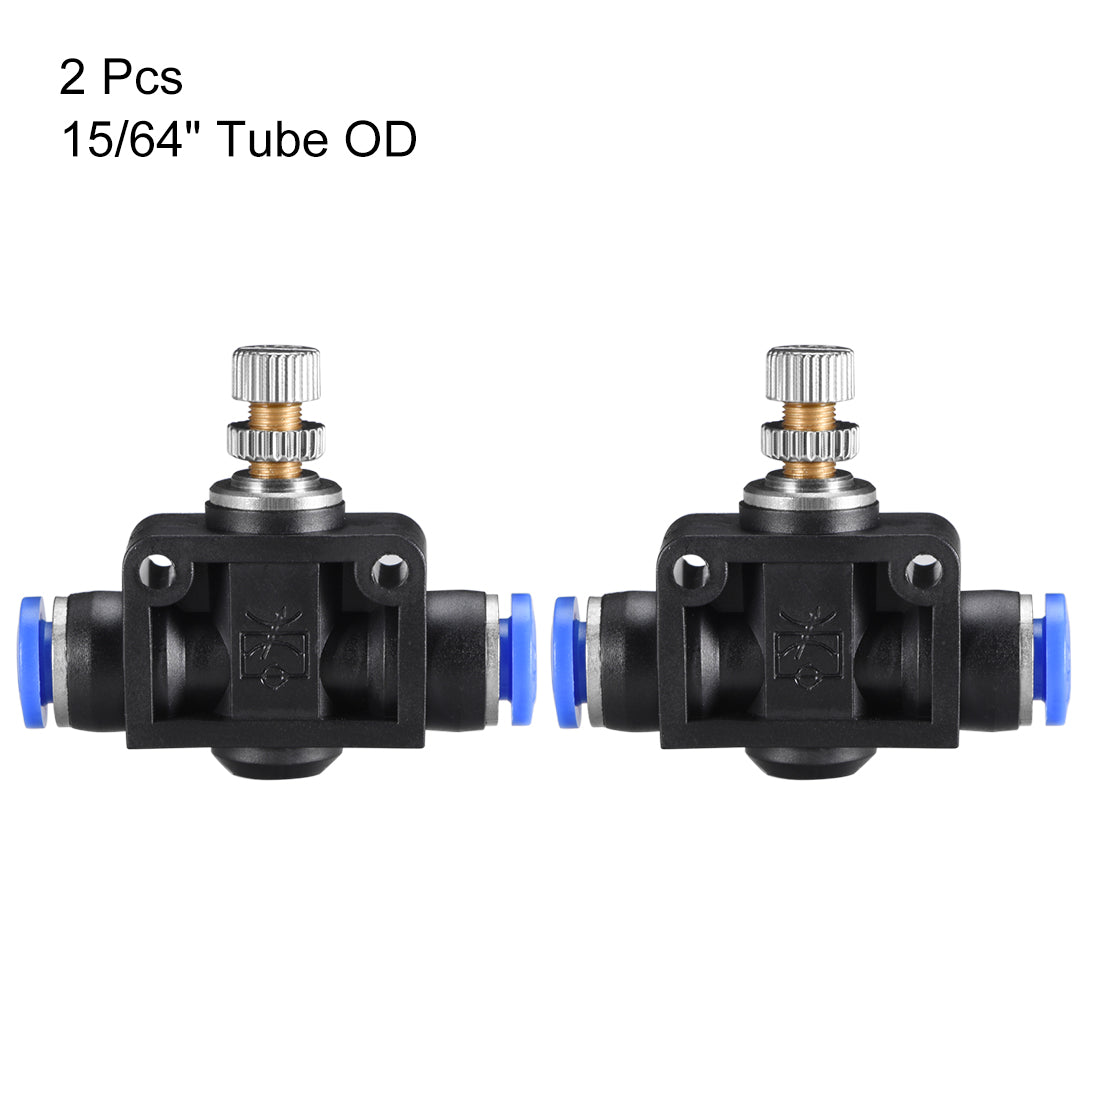 uxcell Uxcell 6mm Tube OD Pneumatic Air Flow Control Valve,In-Line Speed Controller Valve,2pcs